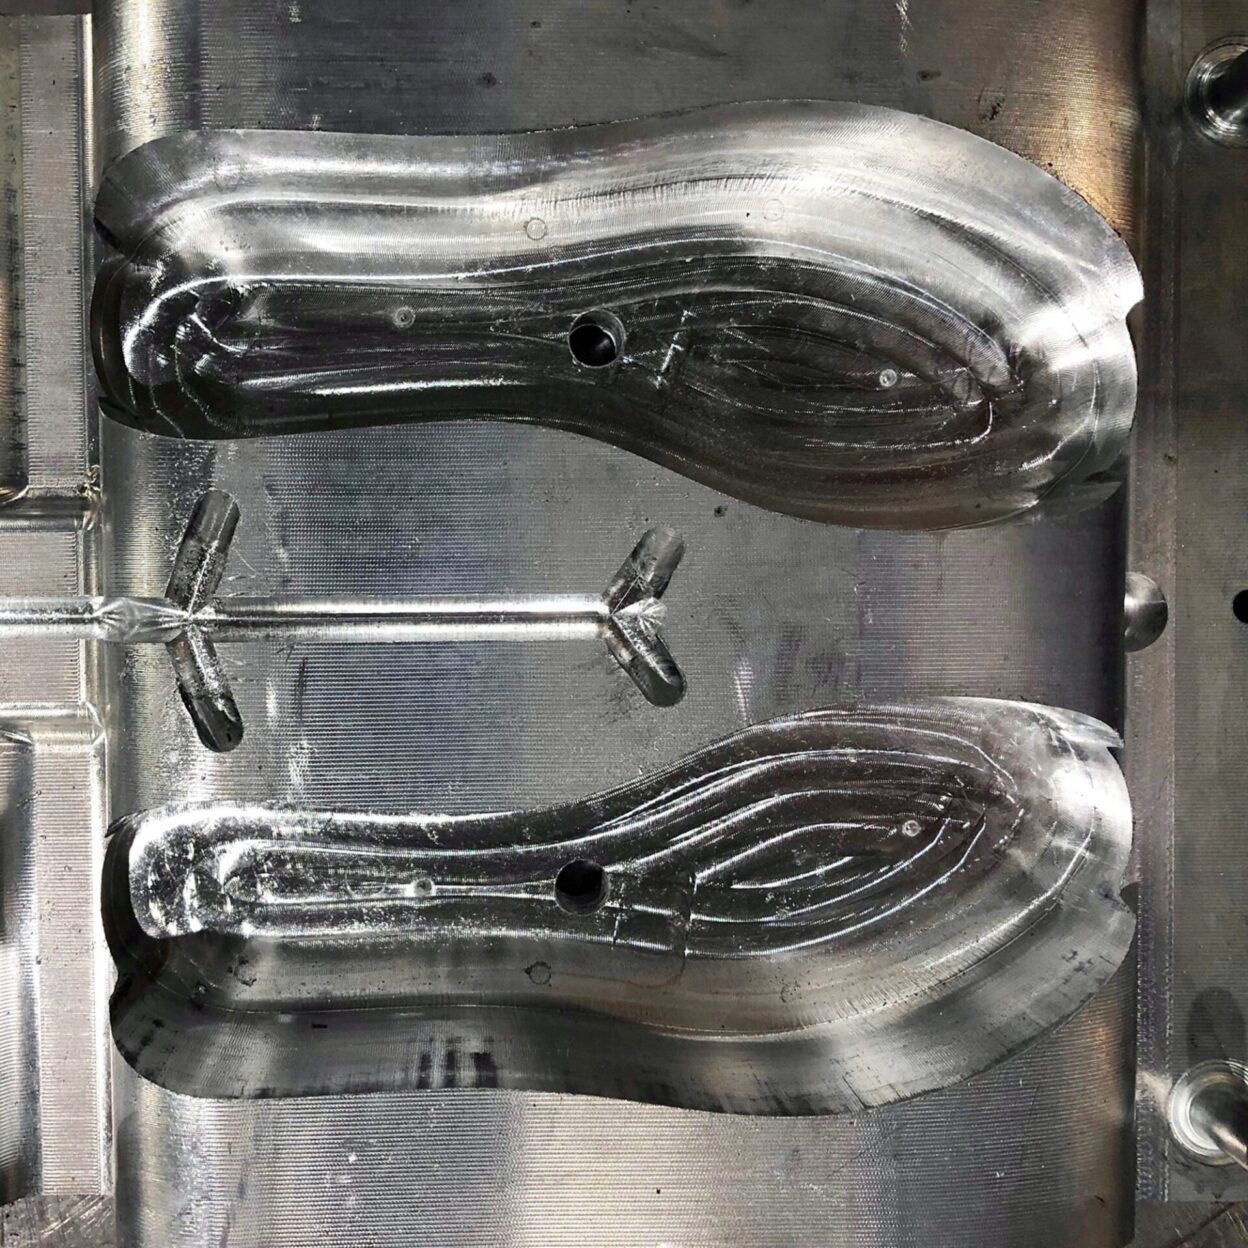 Insole moulds being manufactured in a stainless steel mould press.